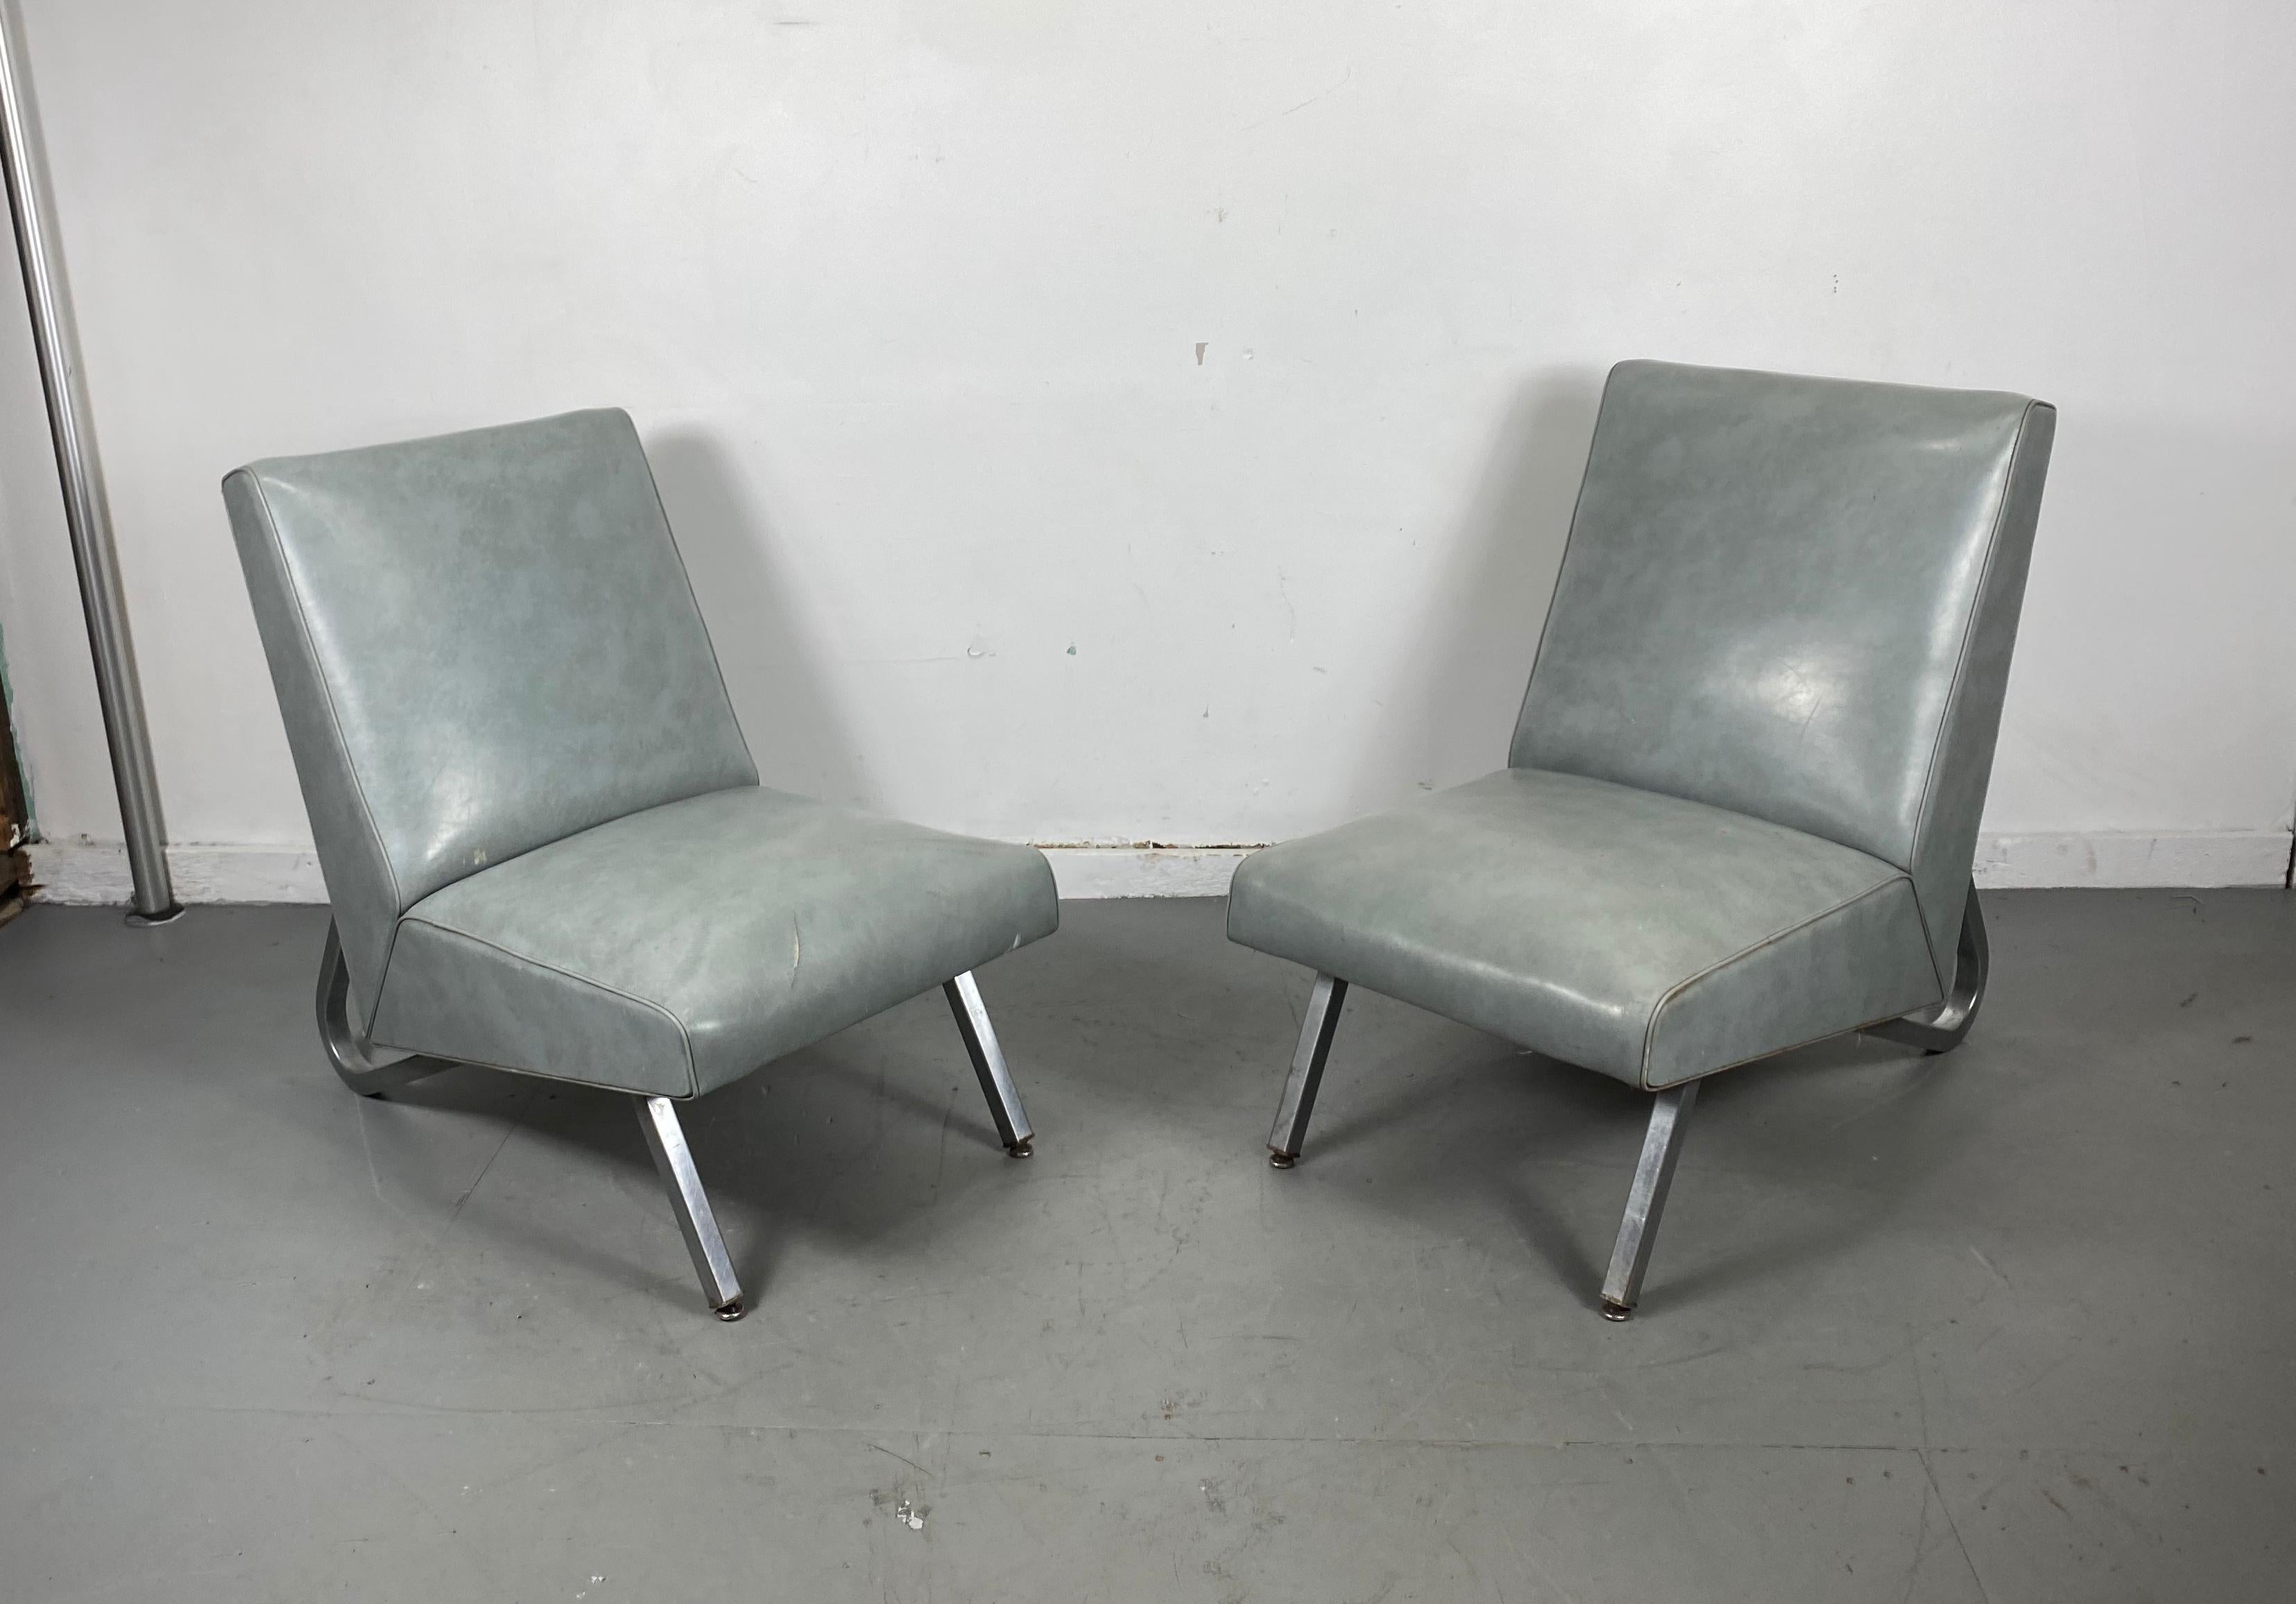 Nice matched pair of lounge chairs manufactured by Royal Metal manufacturing company, unusual square stock aluminum legs, Classic modernist design. Retains original sea foam blue naugahyde fabric, age appropriate wear., minor bumps and bruises.